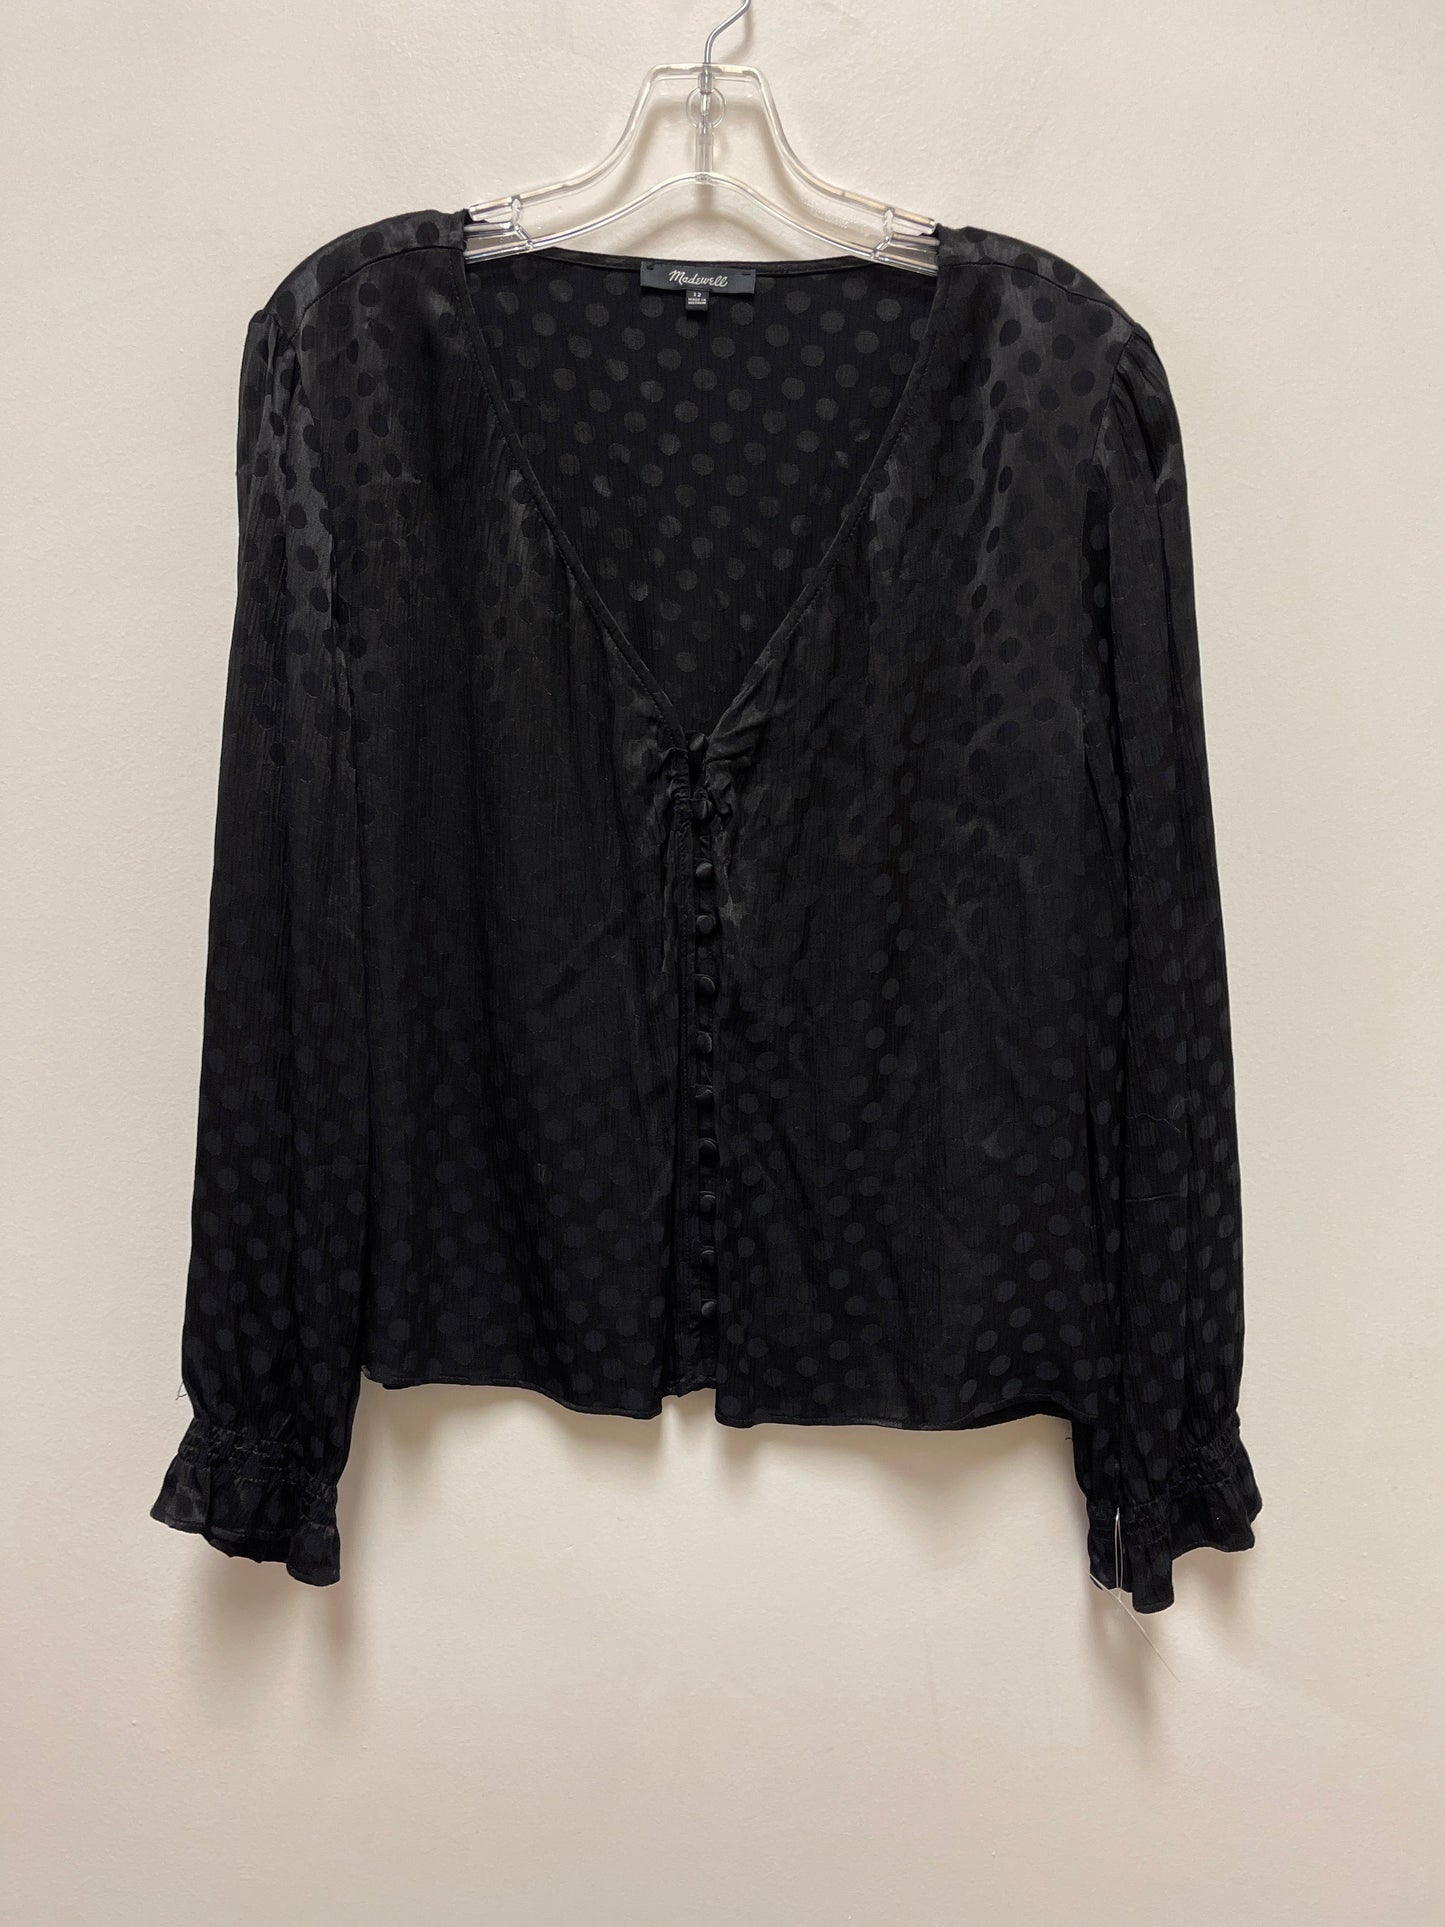 Black Top Long Sleeve Madewell, Size L